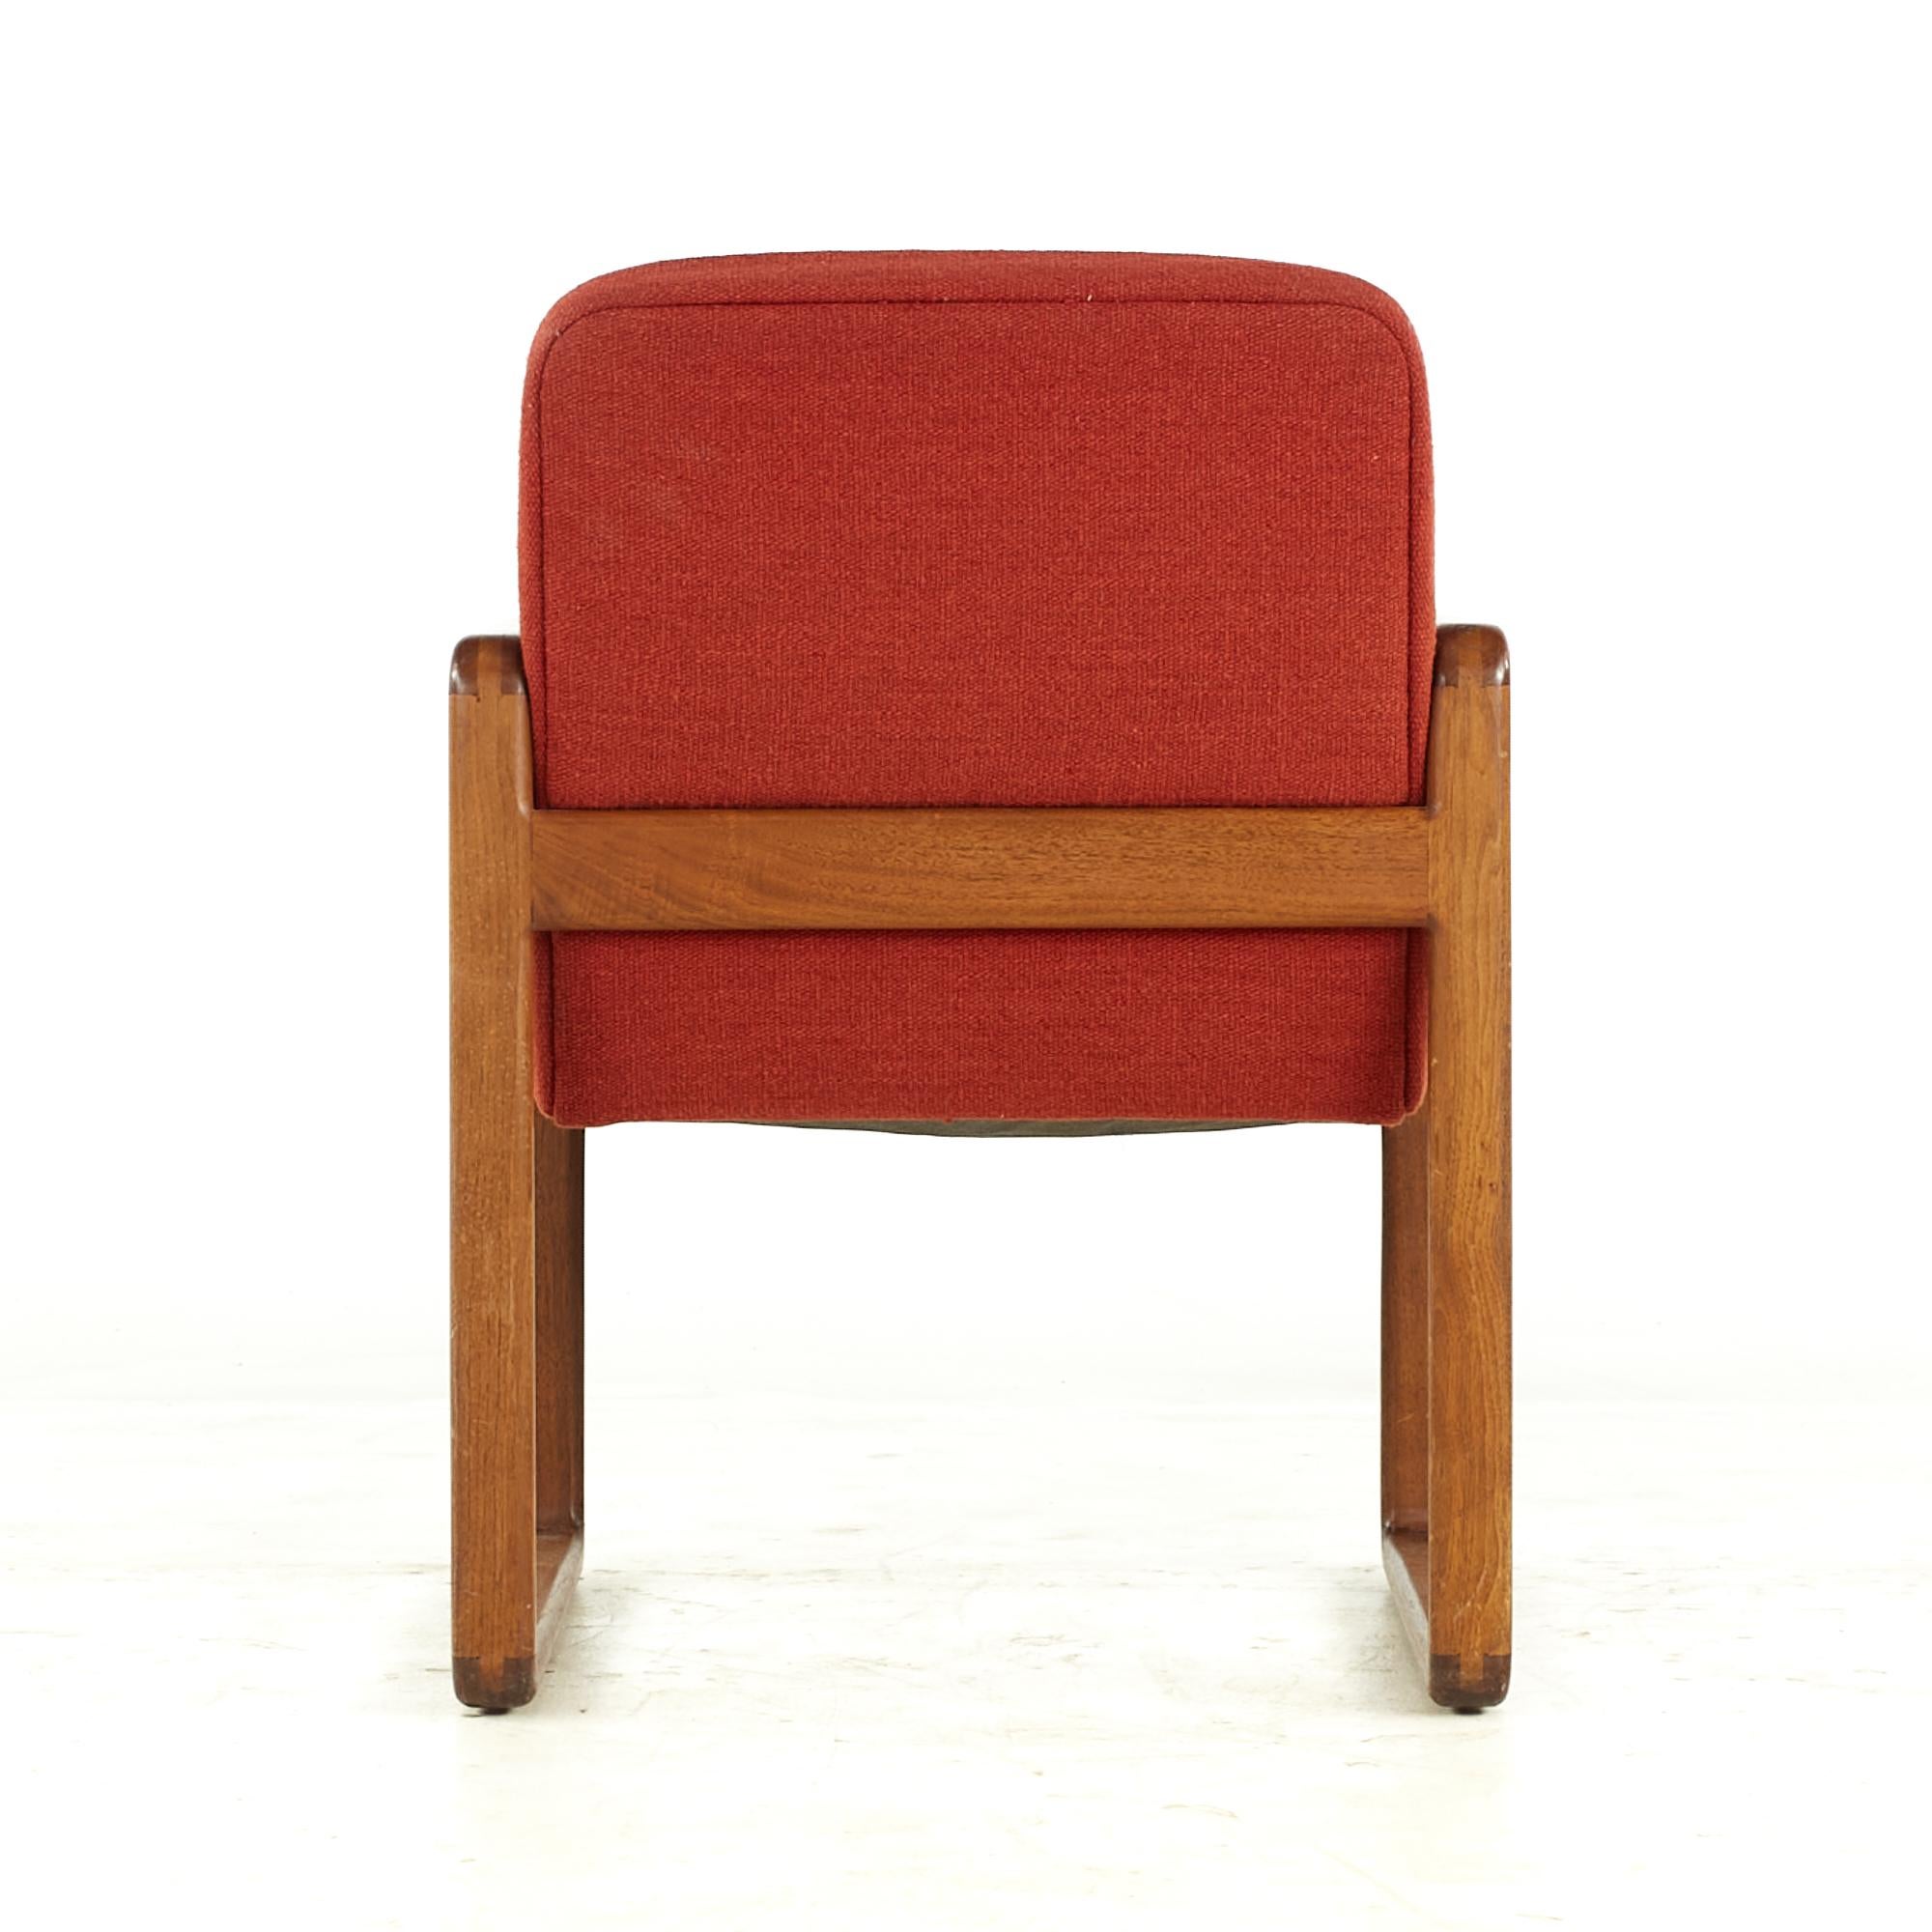 Milo Baughman Style Midcentury Oak Dining Chairs, Set of 6 For Sale 2